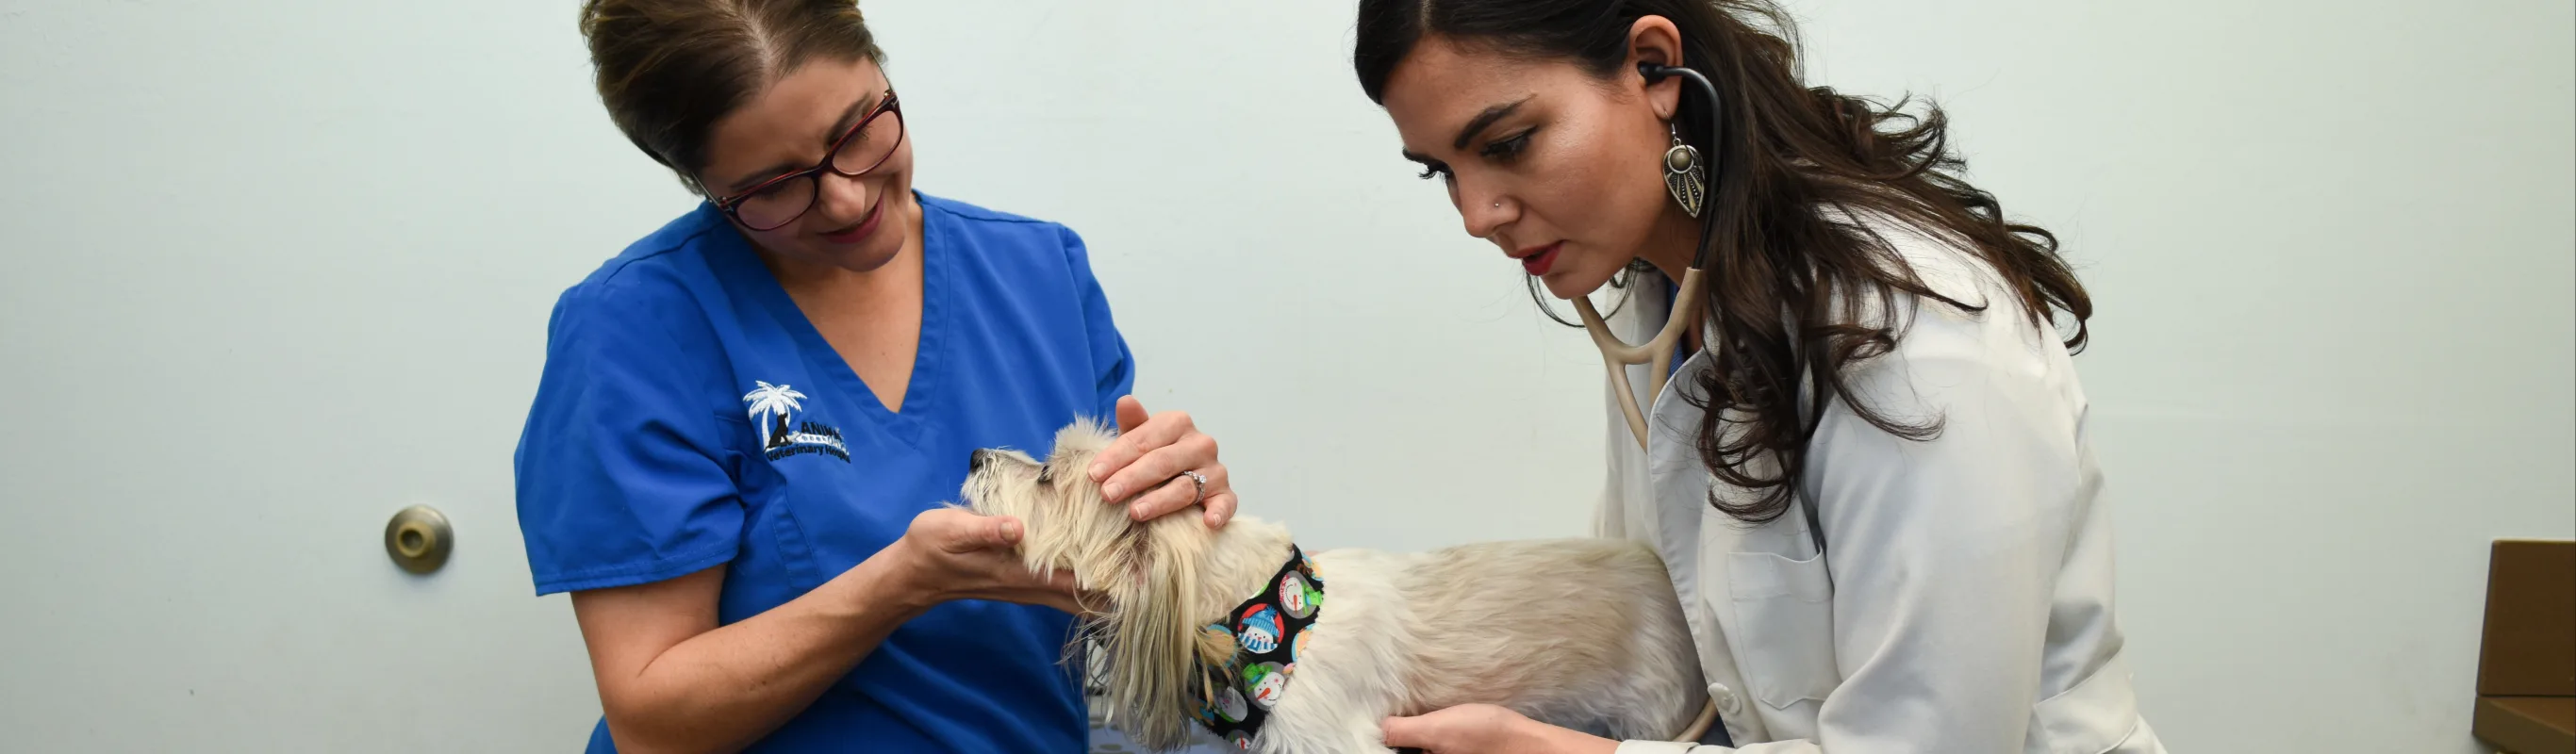 Pet exam by veterinarian and assistant at Animal Oasis Veterinary Hospital